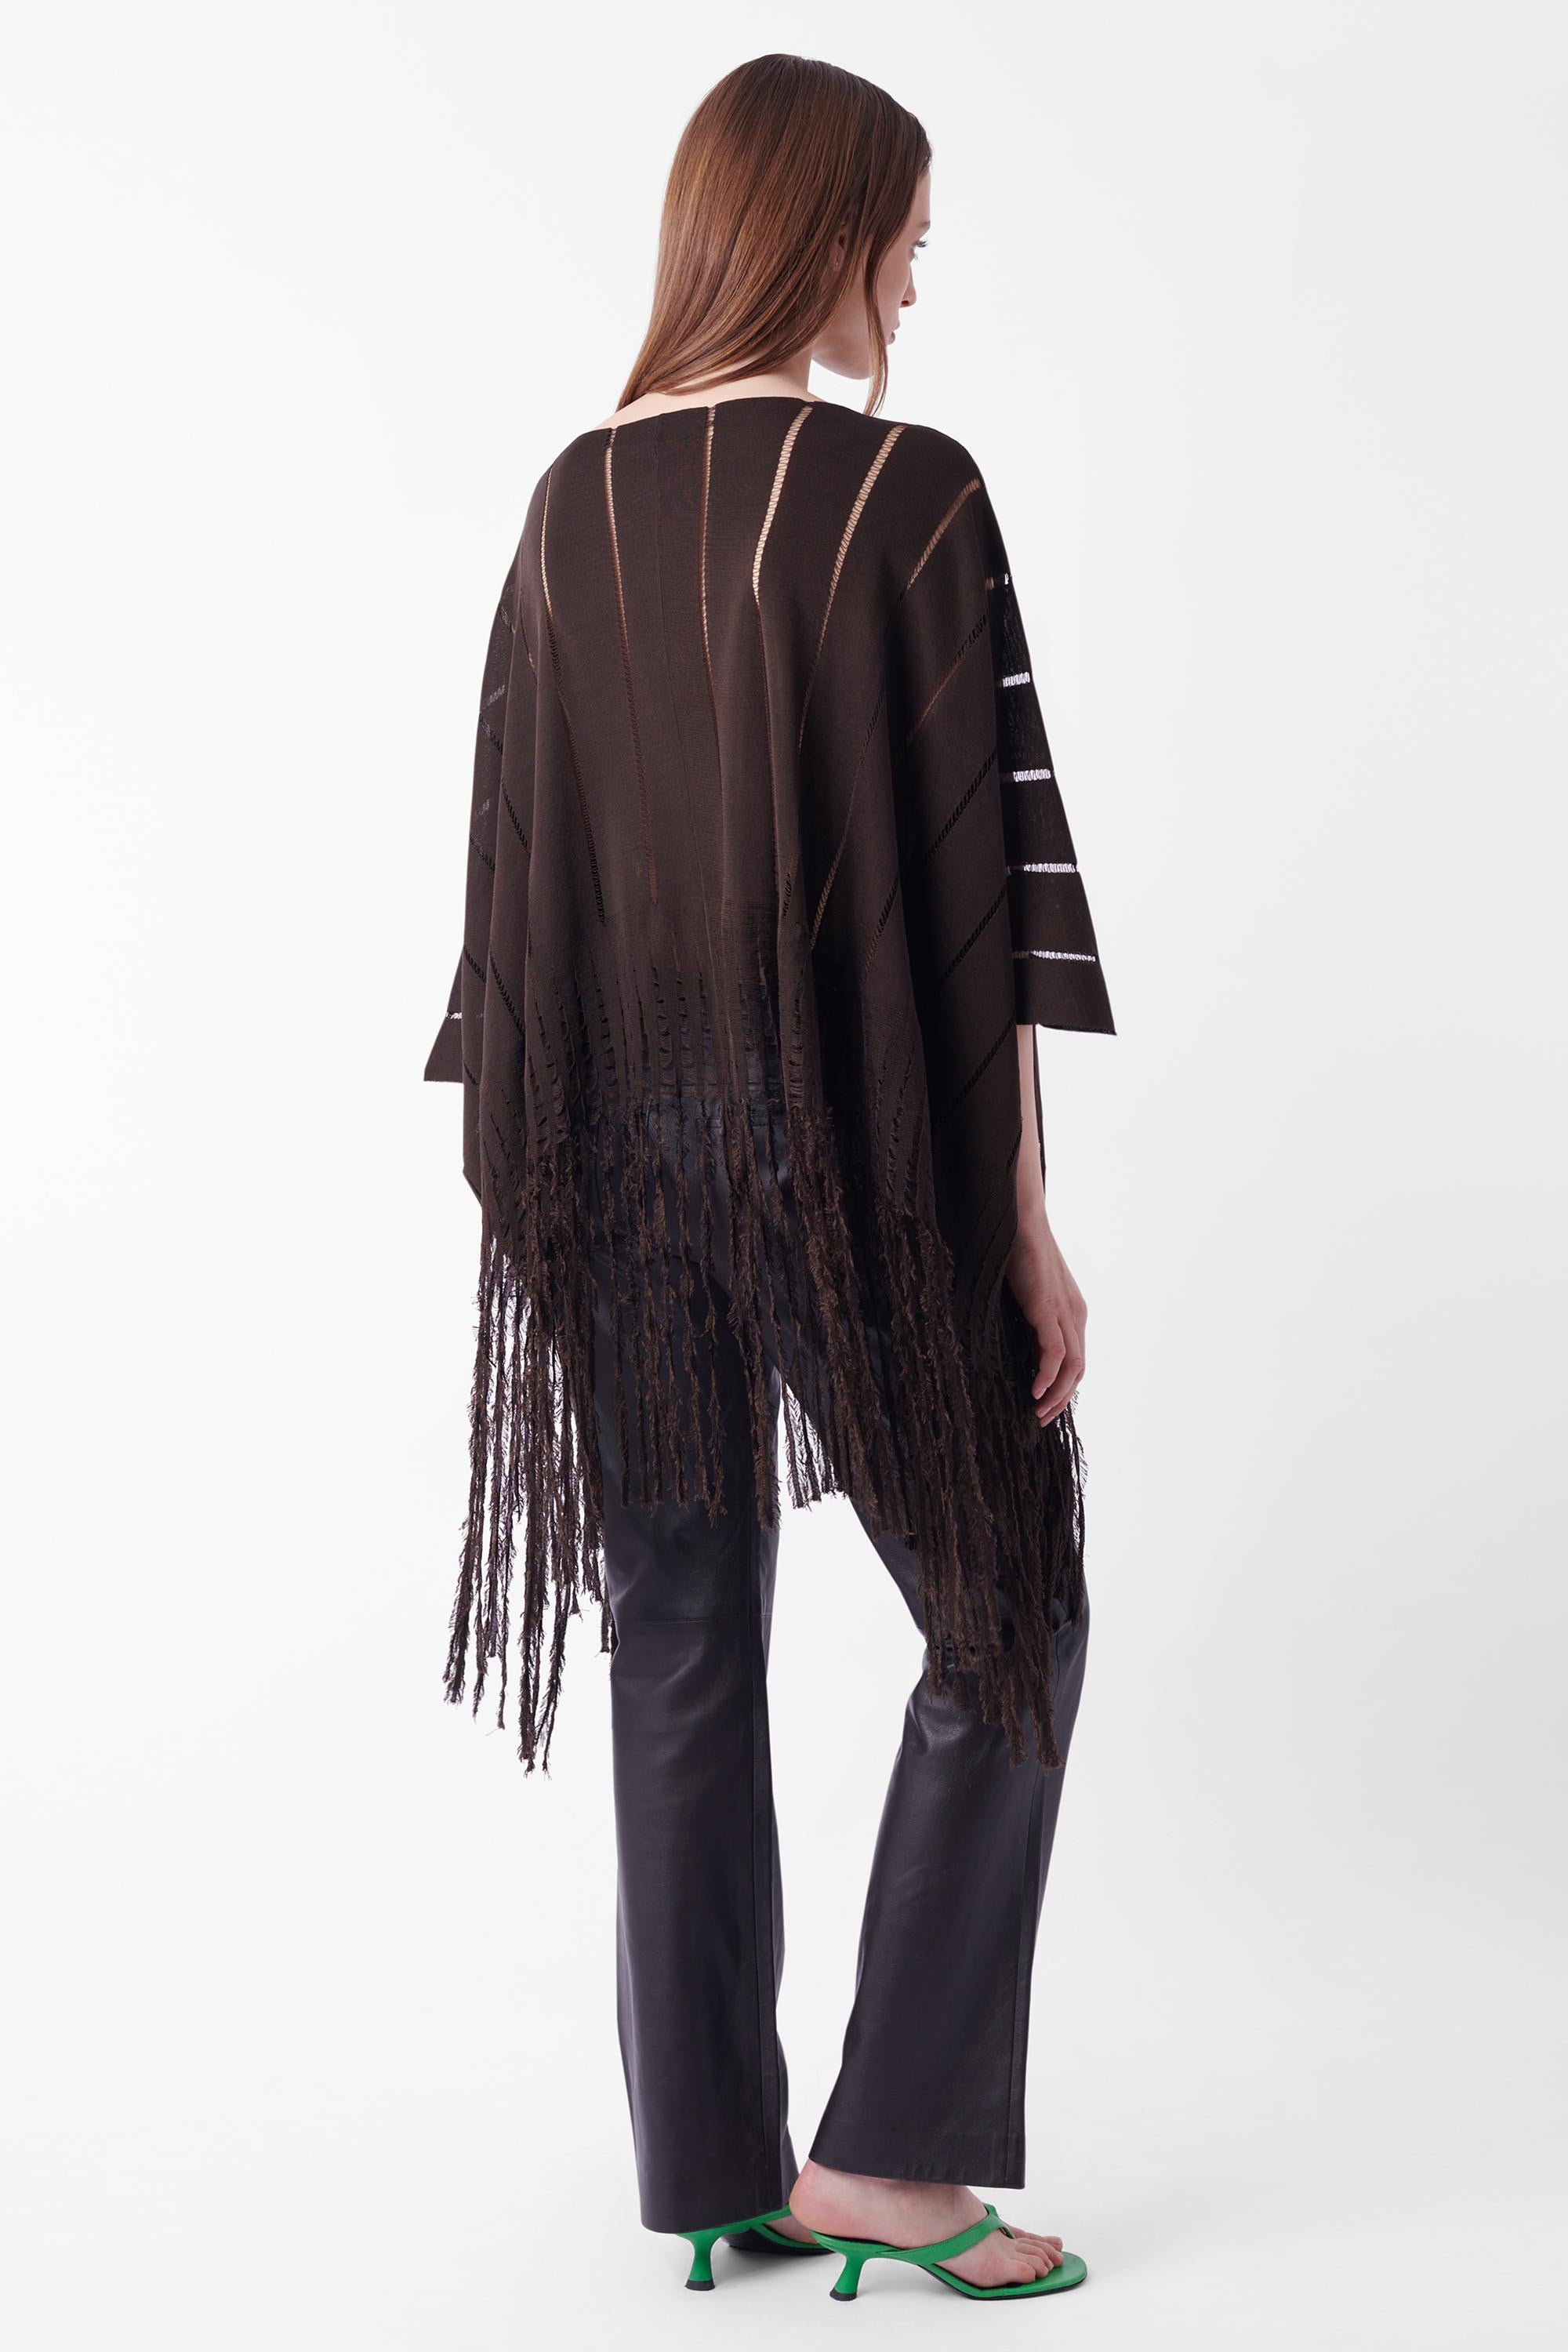 Yves Saint Laurent by Tom Ford Spring Summer 2002 poncho from the Safari collection. Features fringe running along the hem and sheer open stitch detailing running in a vertical format. Can be worn as a skirt. In great vintage condition, minimal